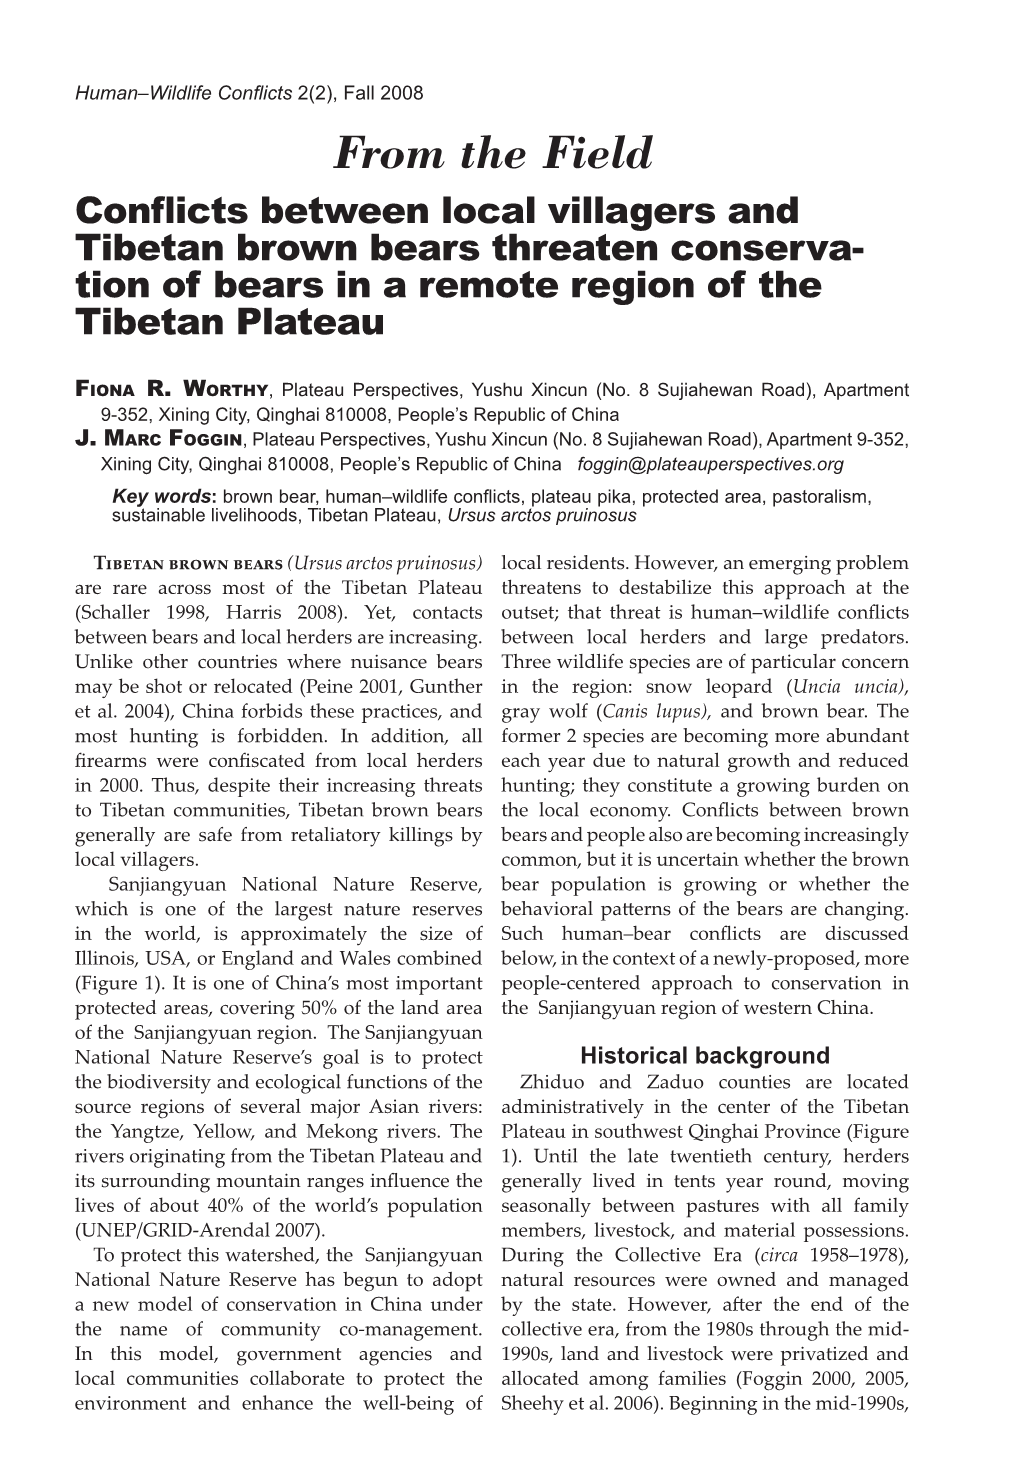 Conflicts Between Local Villagers and Tibetan Brown Bears Threaten Conserva- Tion of Bears in a Remote Region of the Tibetan Plateau